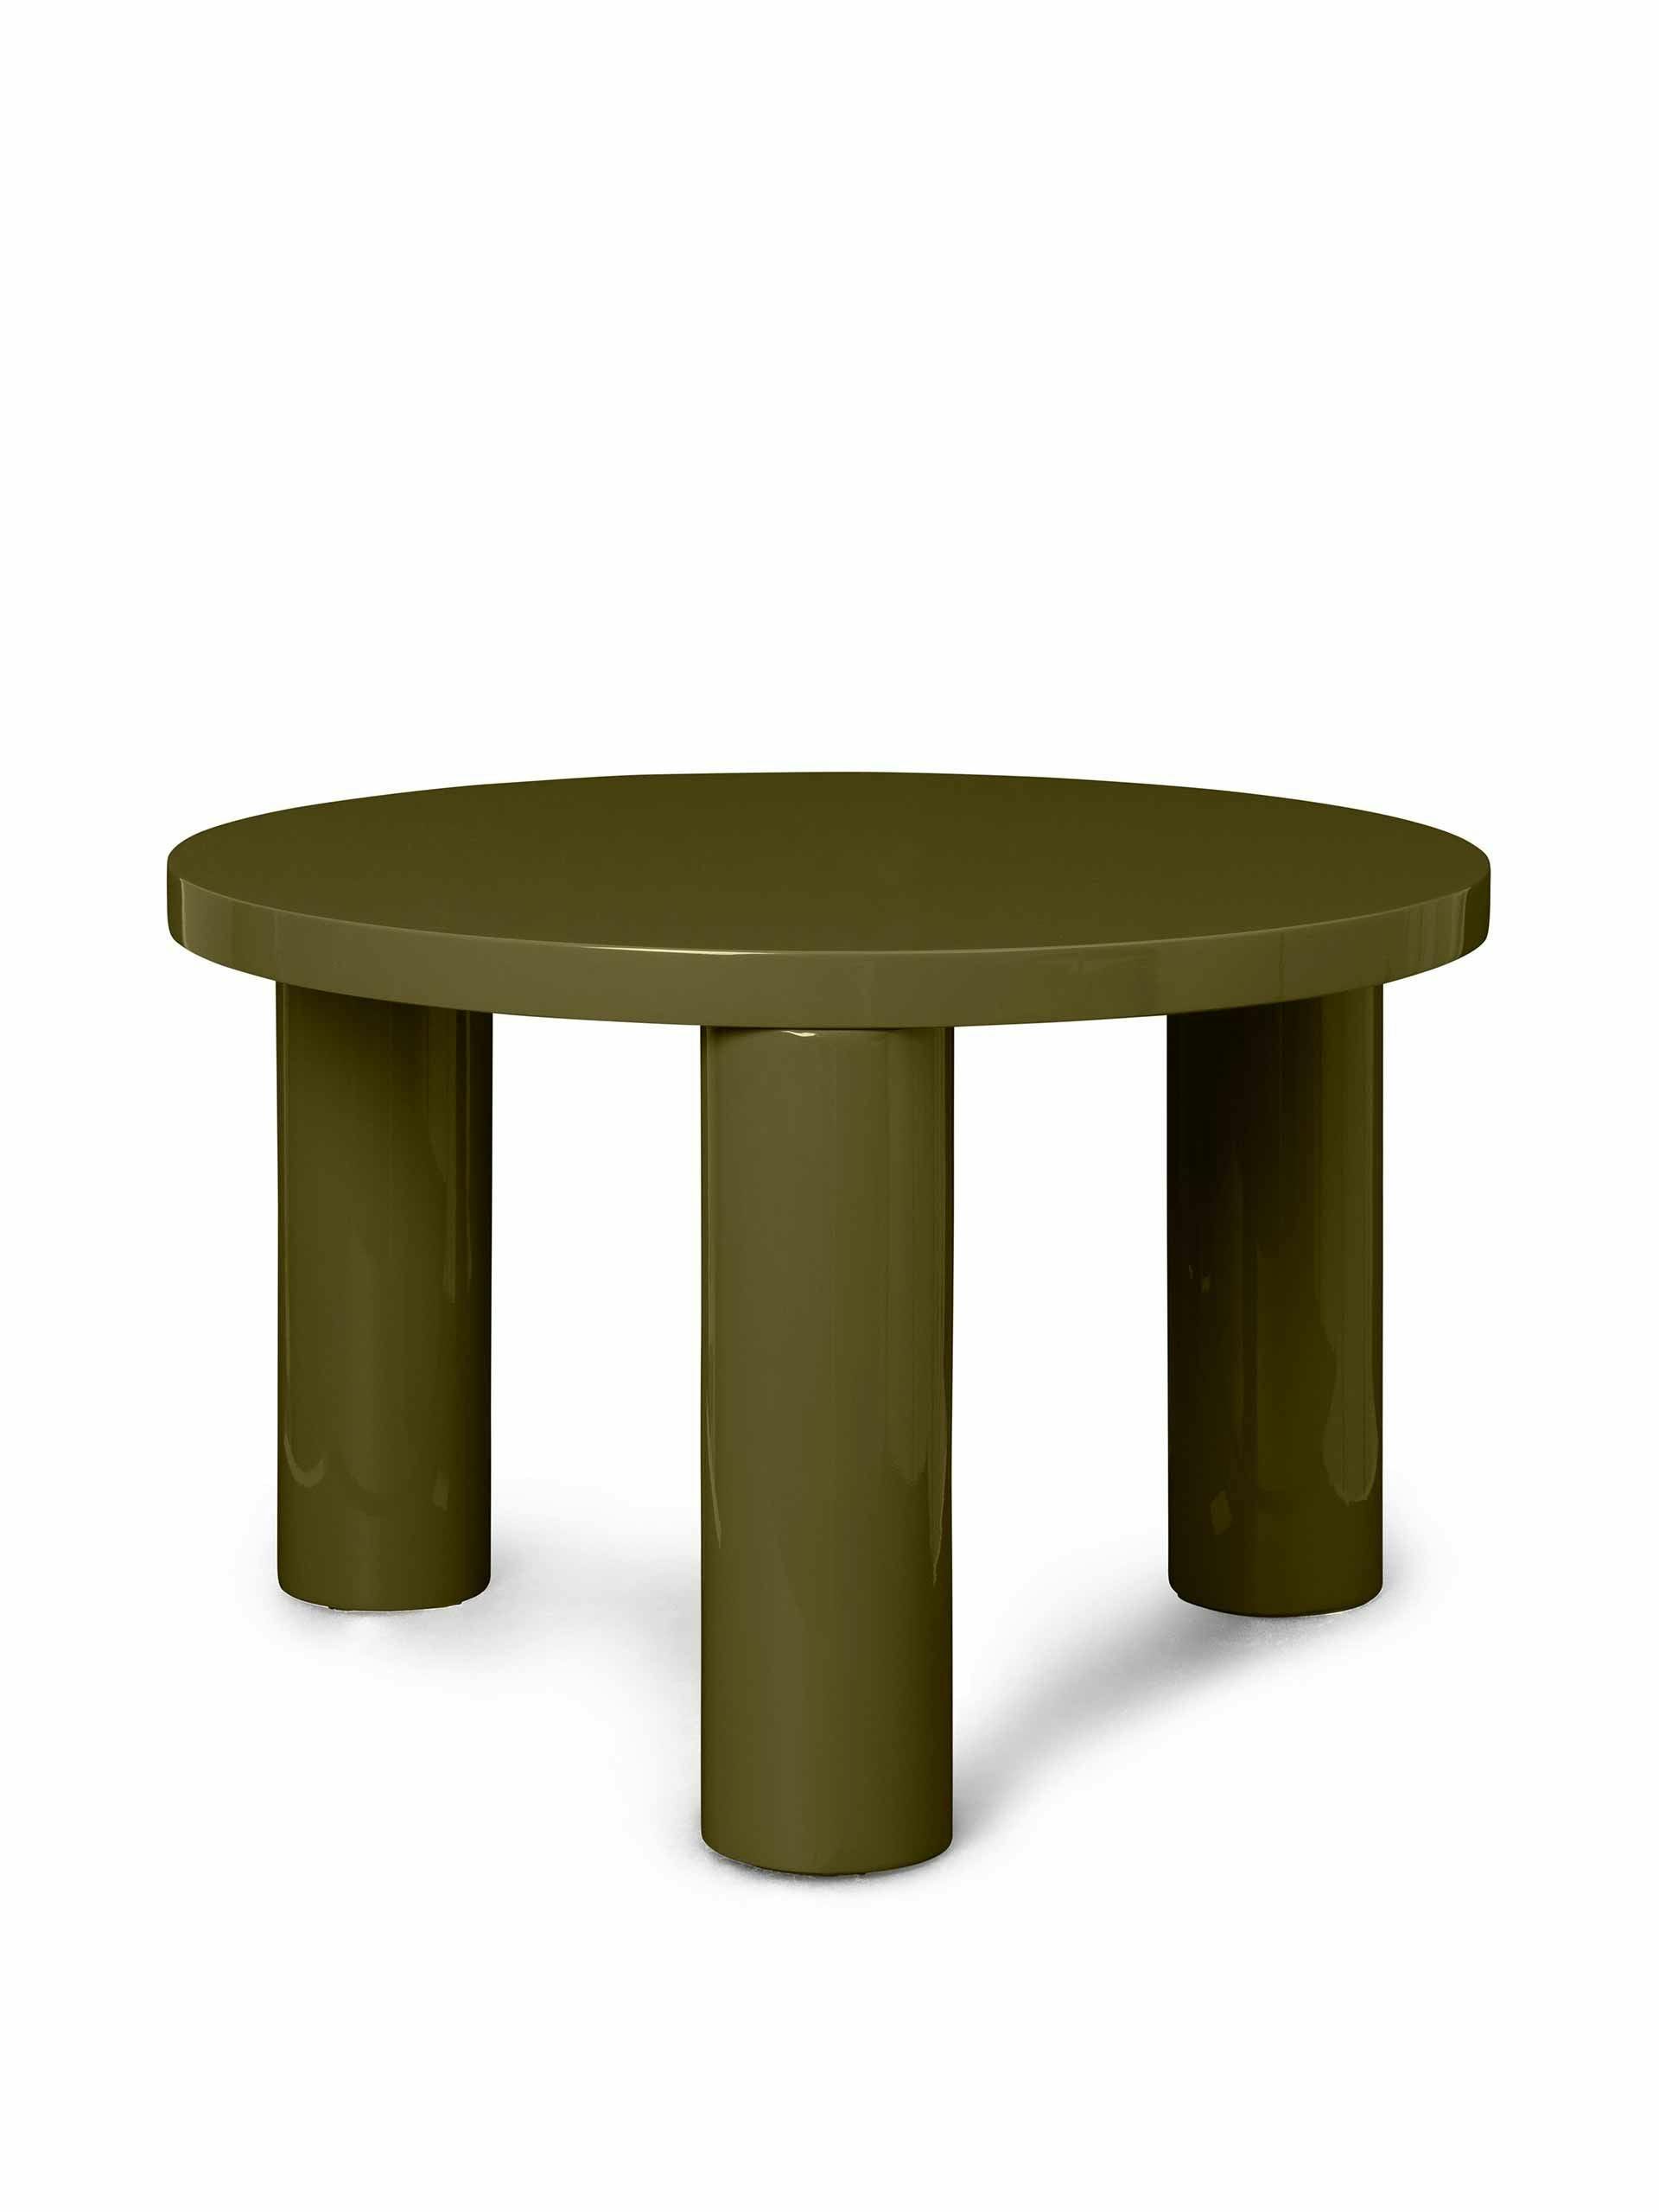 Coffee table in lacquered olive green